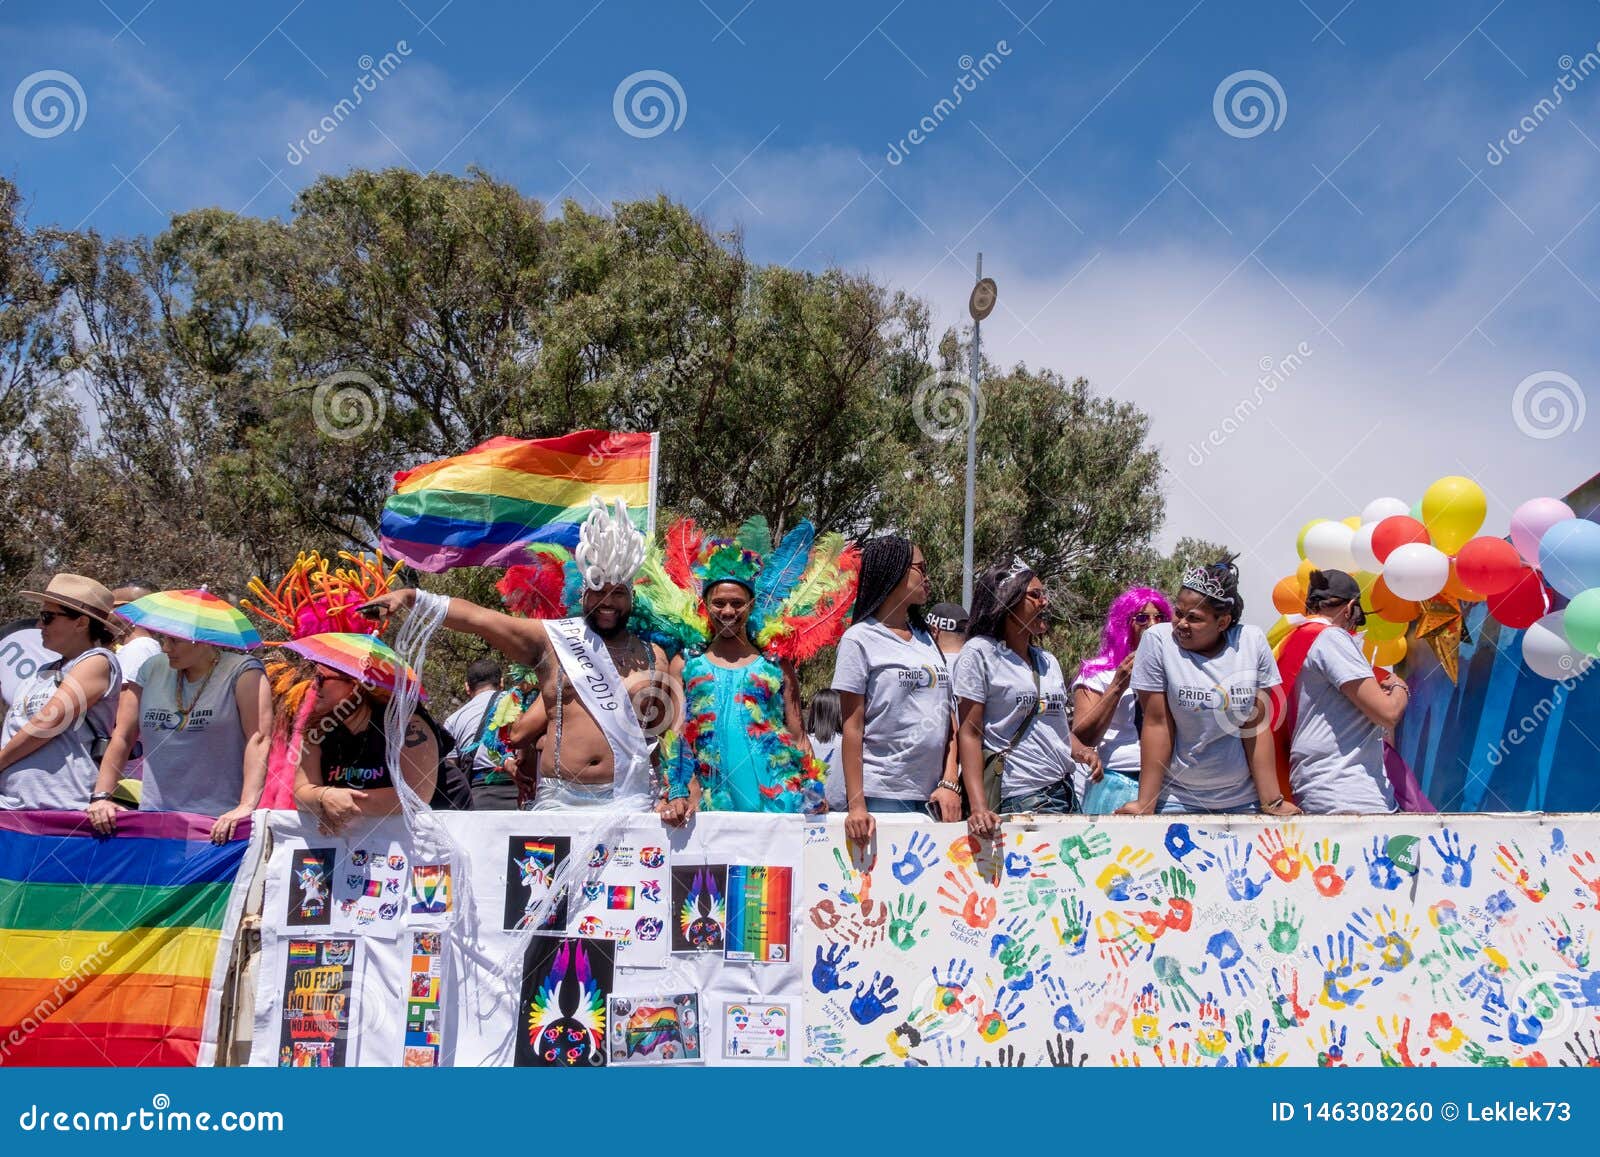 Photo Of Participants And Rainbow Flags At The Gay Pride Parade Procession In Cape Town South